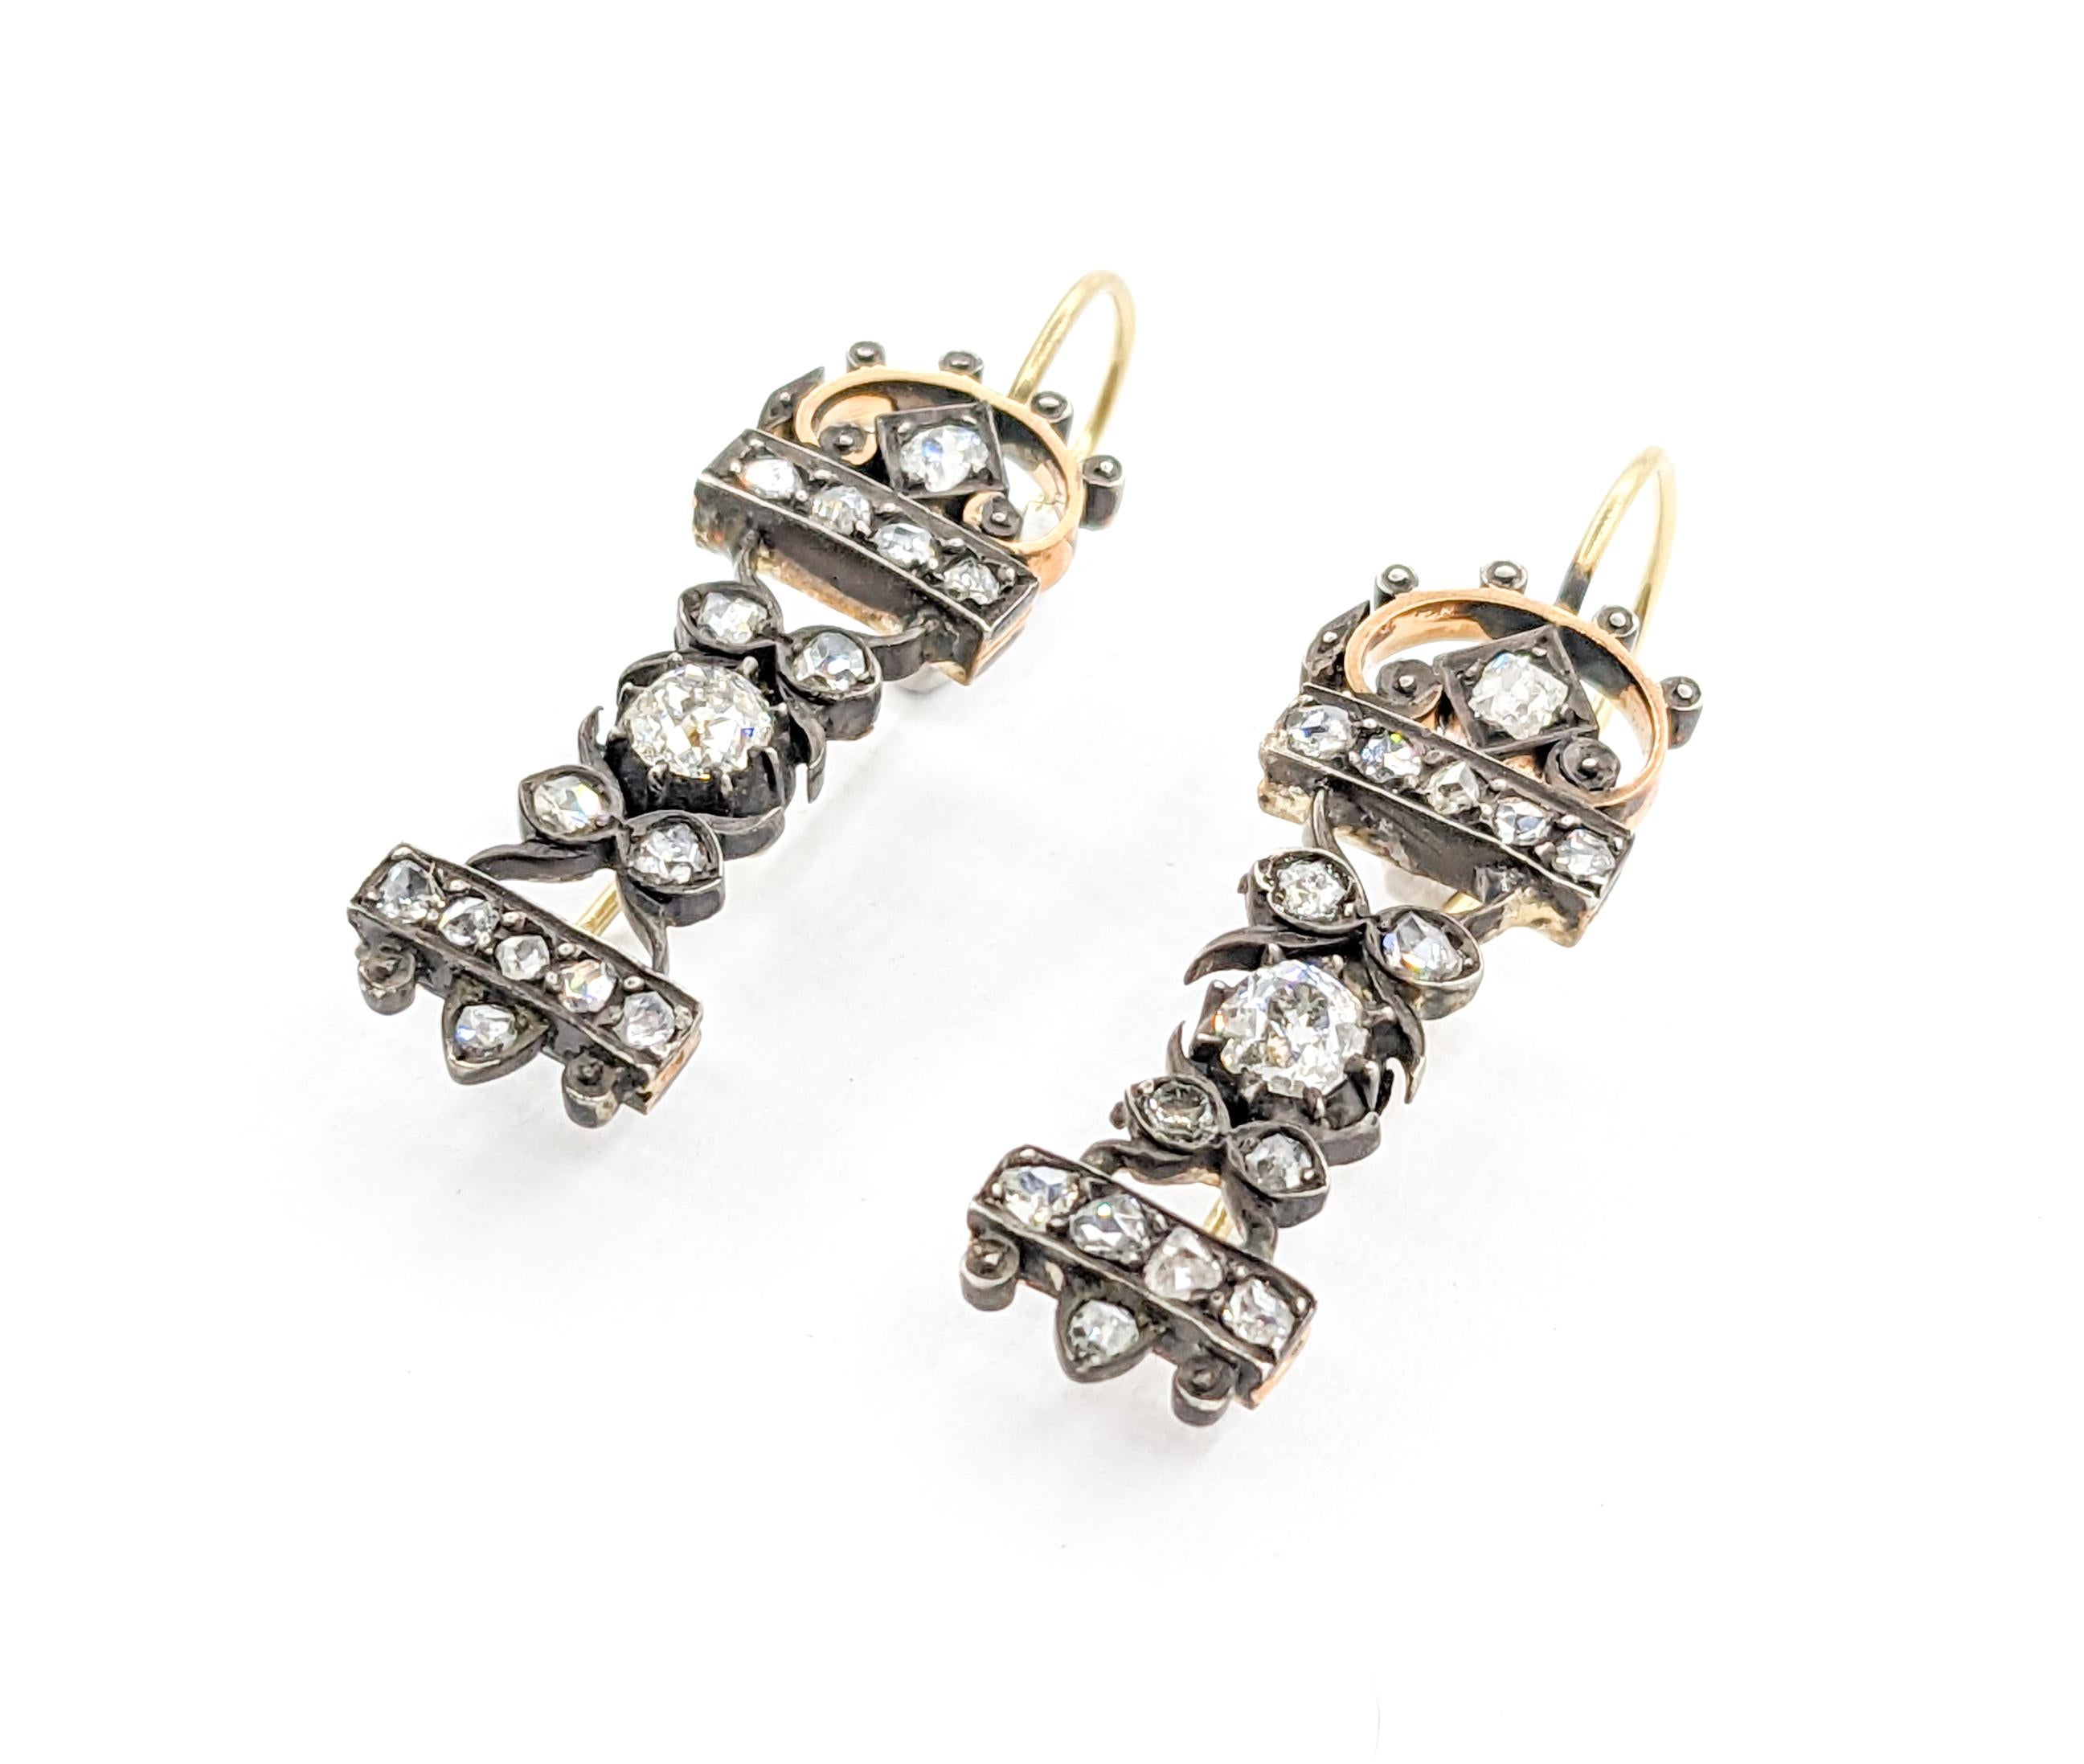 Rose Cut Antique 1.85ctw Diamond Earrings In 14kt Gold & Sterling silver For Sale